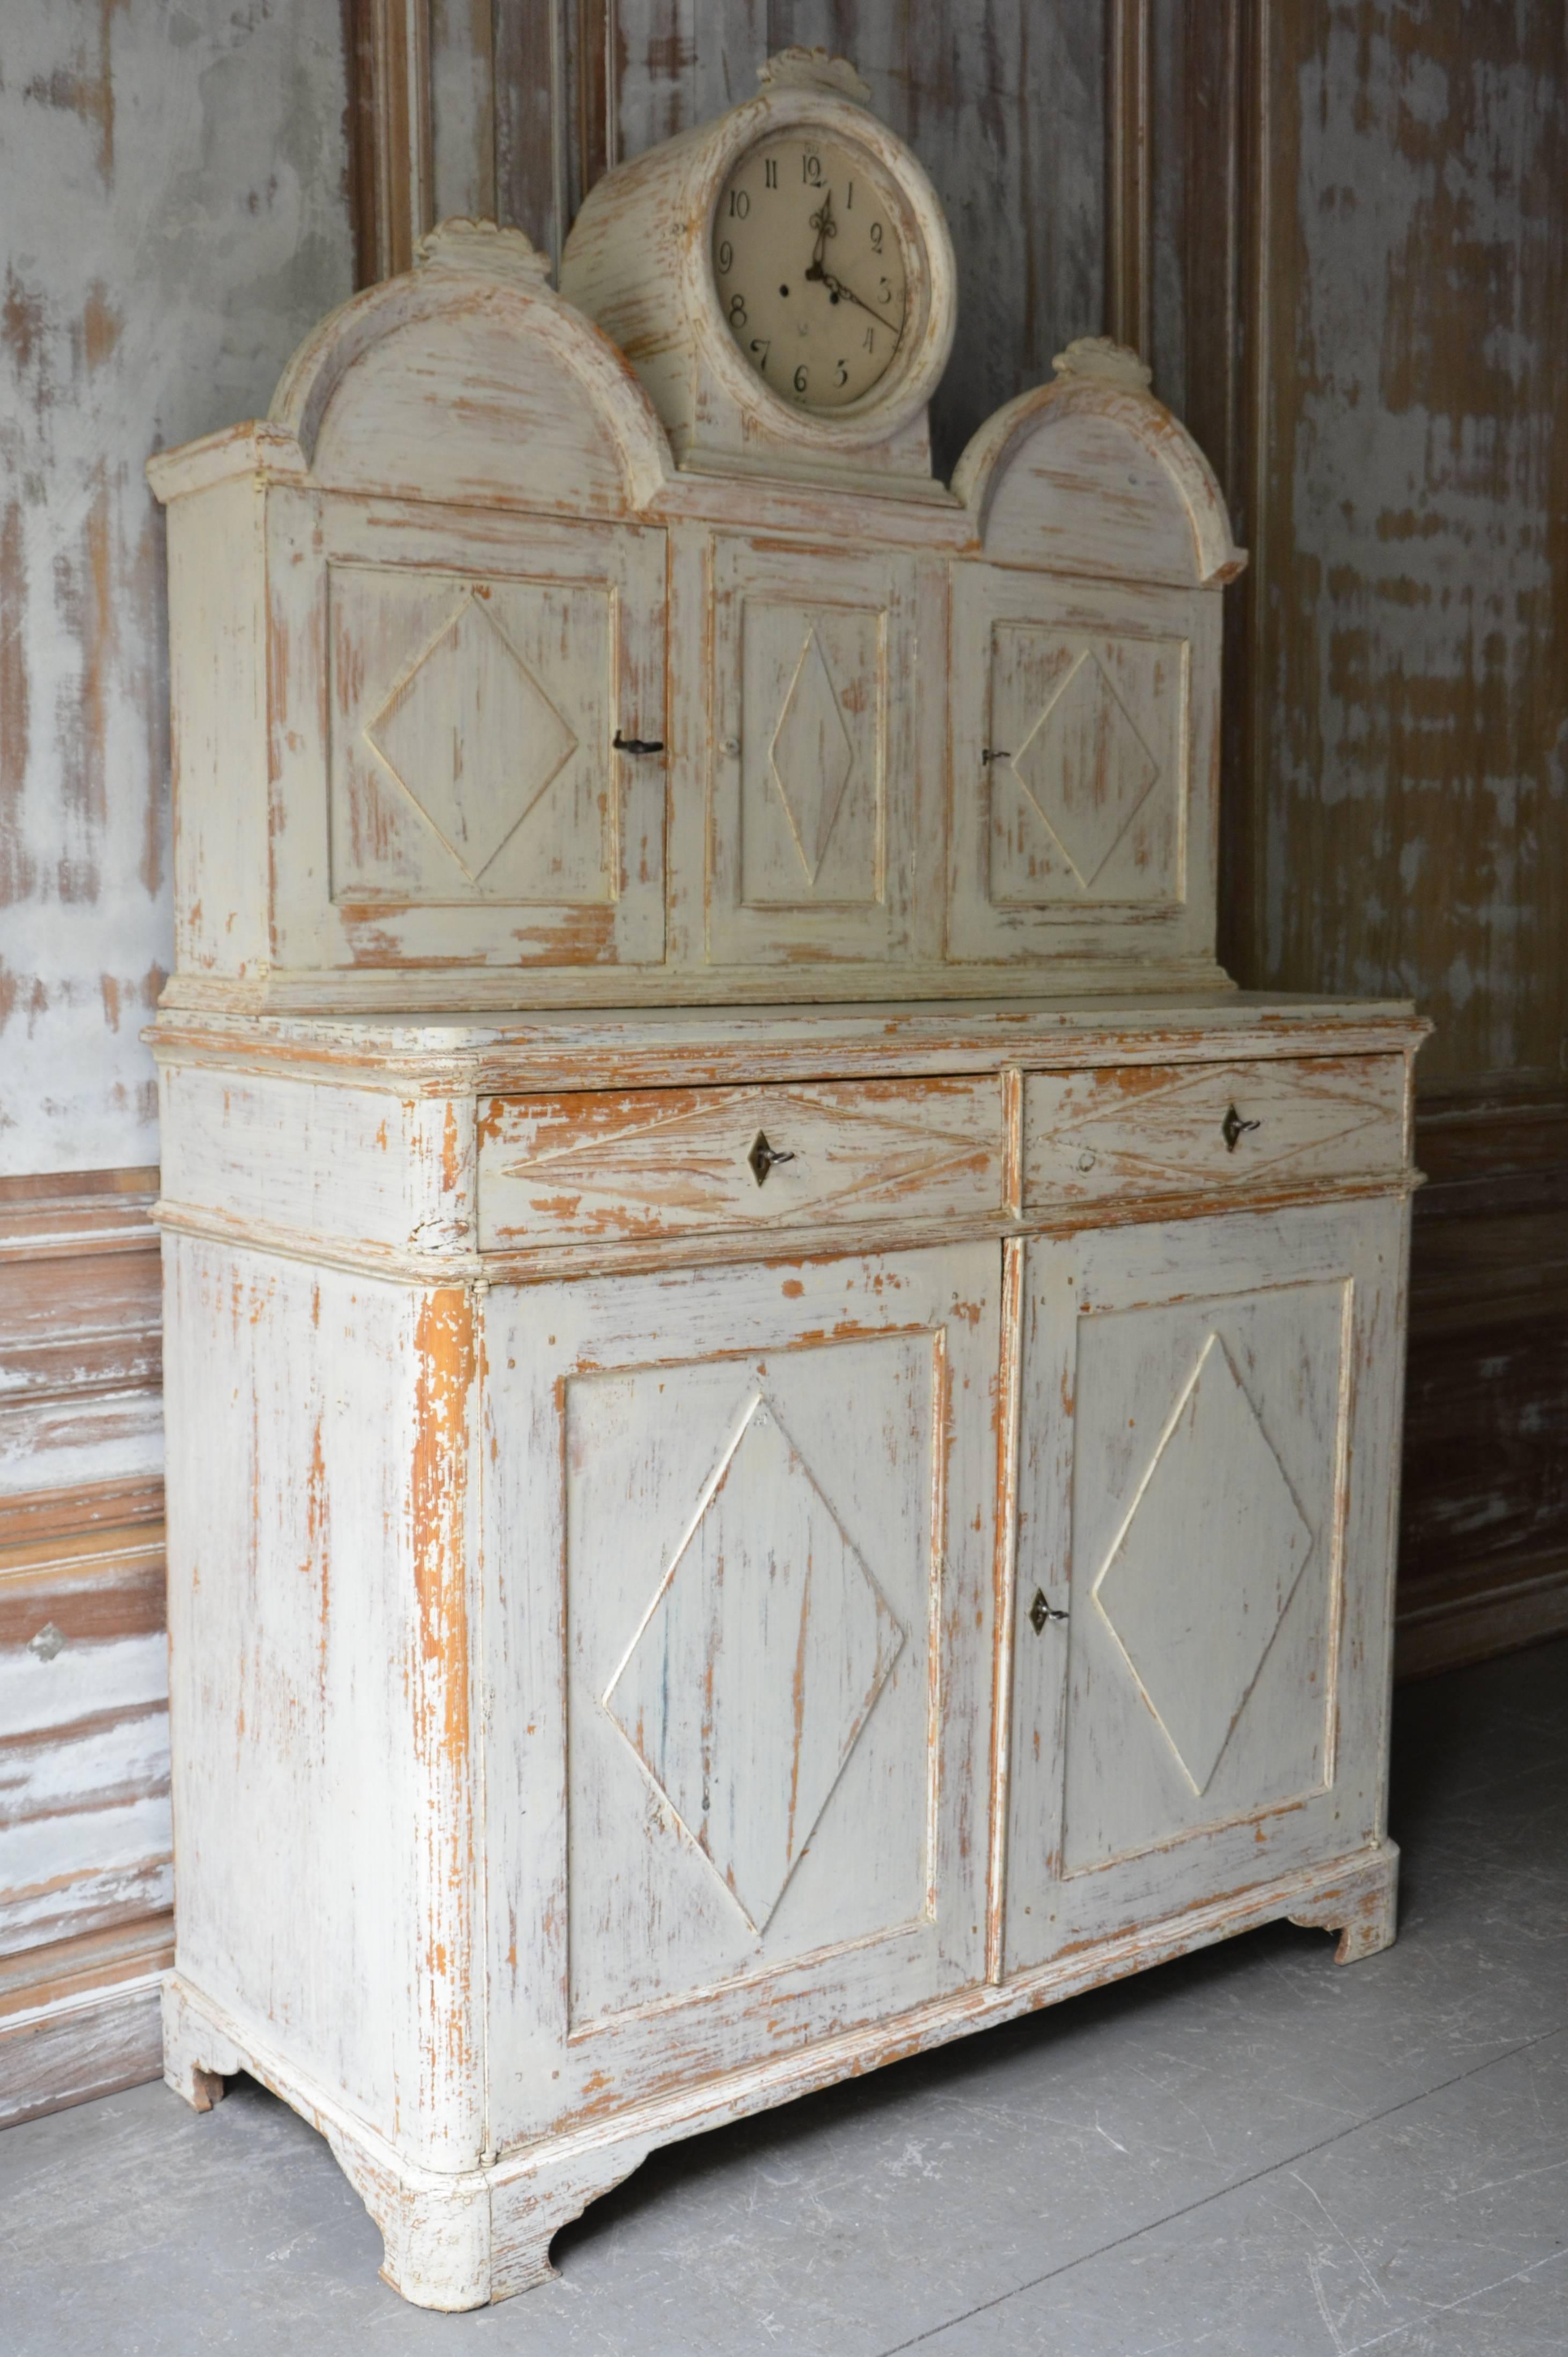 Very rare Swedish Gustavian cupboard with clock.
Late Gustavian Swedish cabinet comes in two parts and displays Classic Gustavian styling including raised panel doors with diamond chapped decors on each side of the clock casing, original hardware.